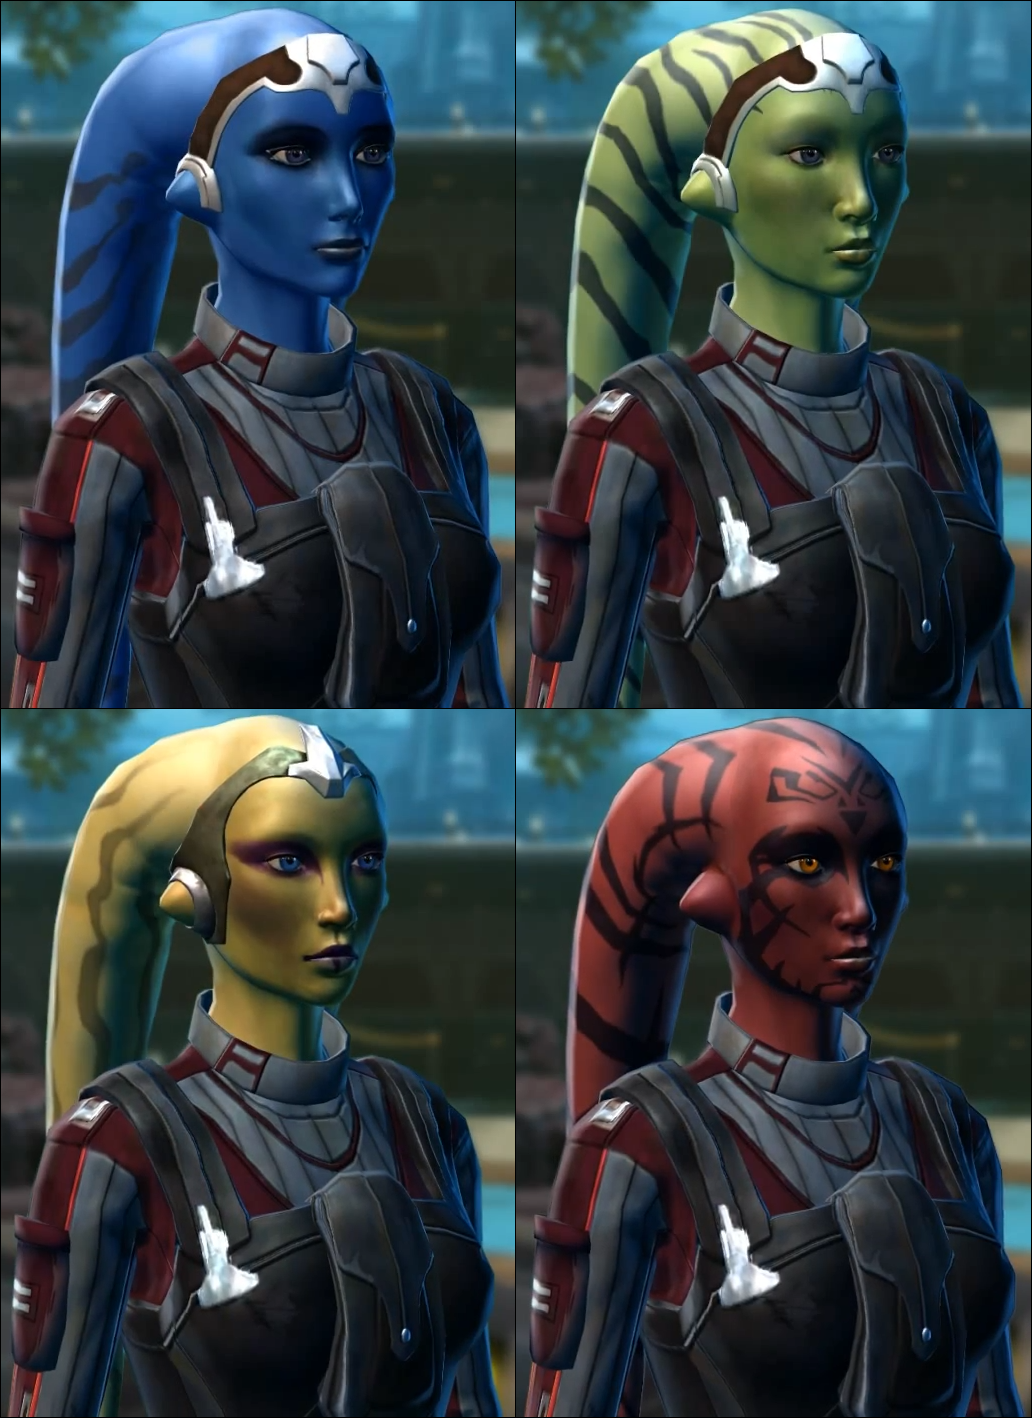 Swtor vette conversation guideshow all. 